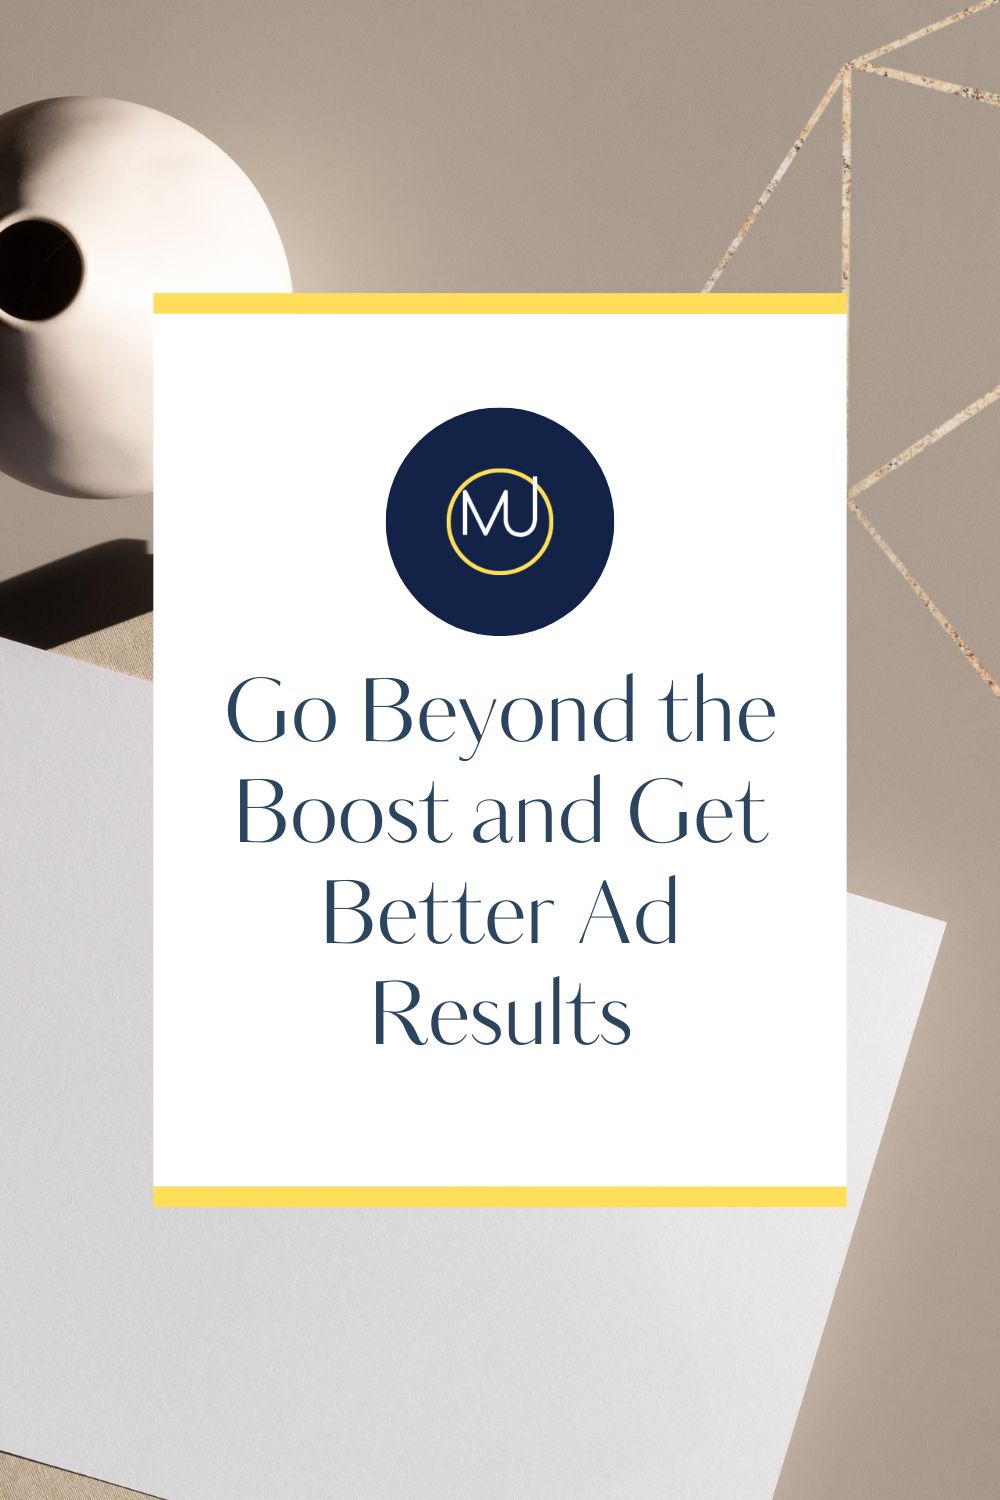 Go beyond the boost button and get better results with your Facebook ads.